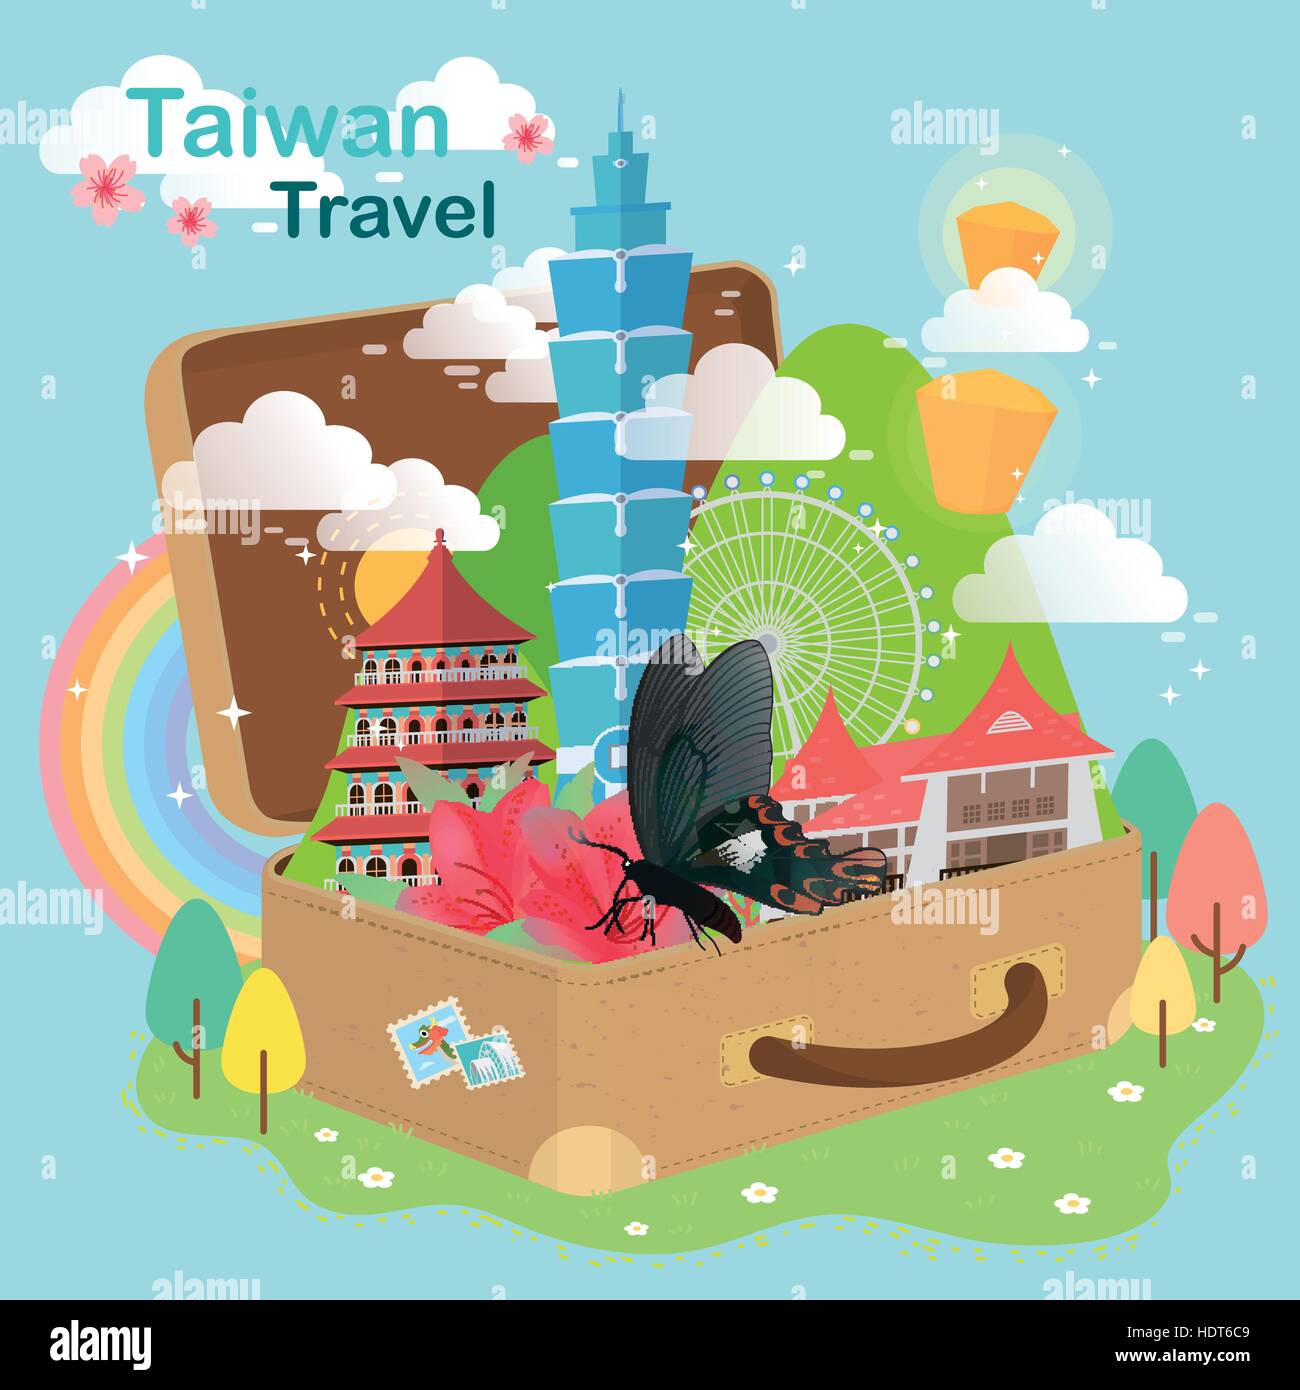 adorable Taiwan travel concept - attractions in luggage Stock Vector